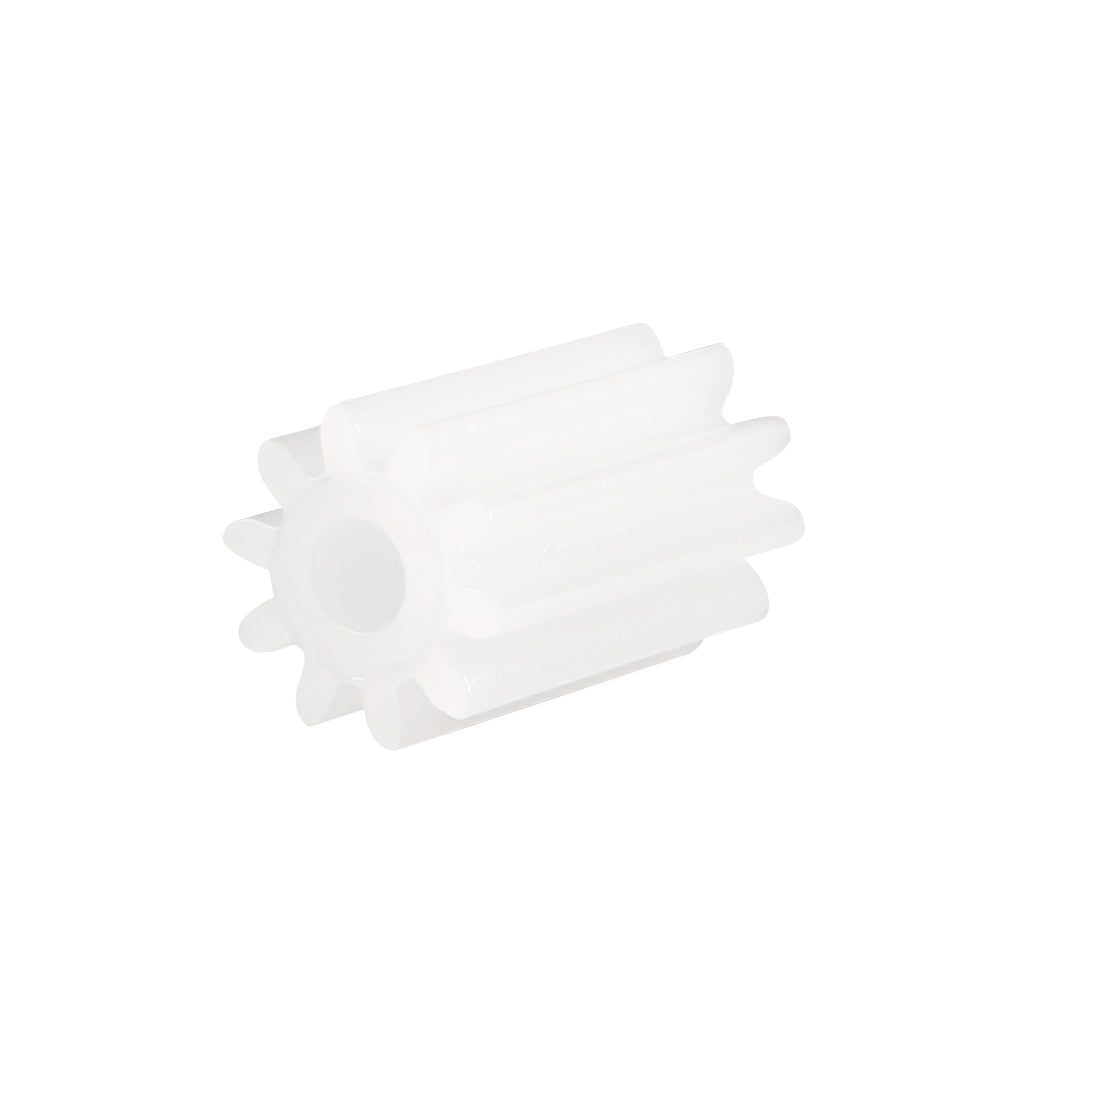 uxcell Uxcell 30 Pcs 102A Plastic Gear 6mm OD with 10Teeth for DIY Car Robot Motors